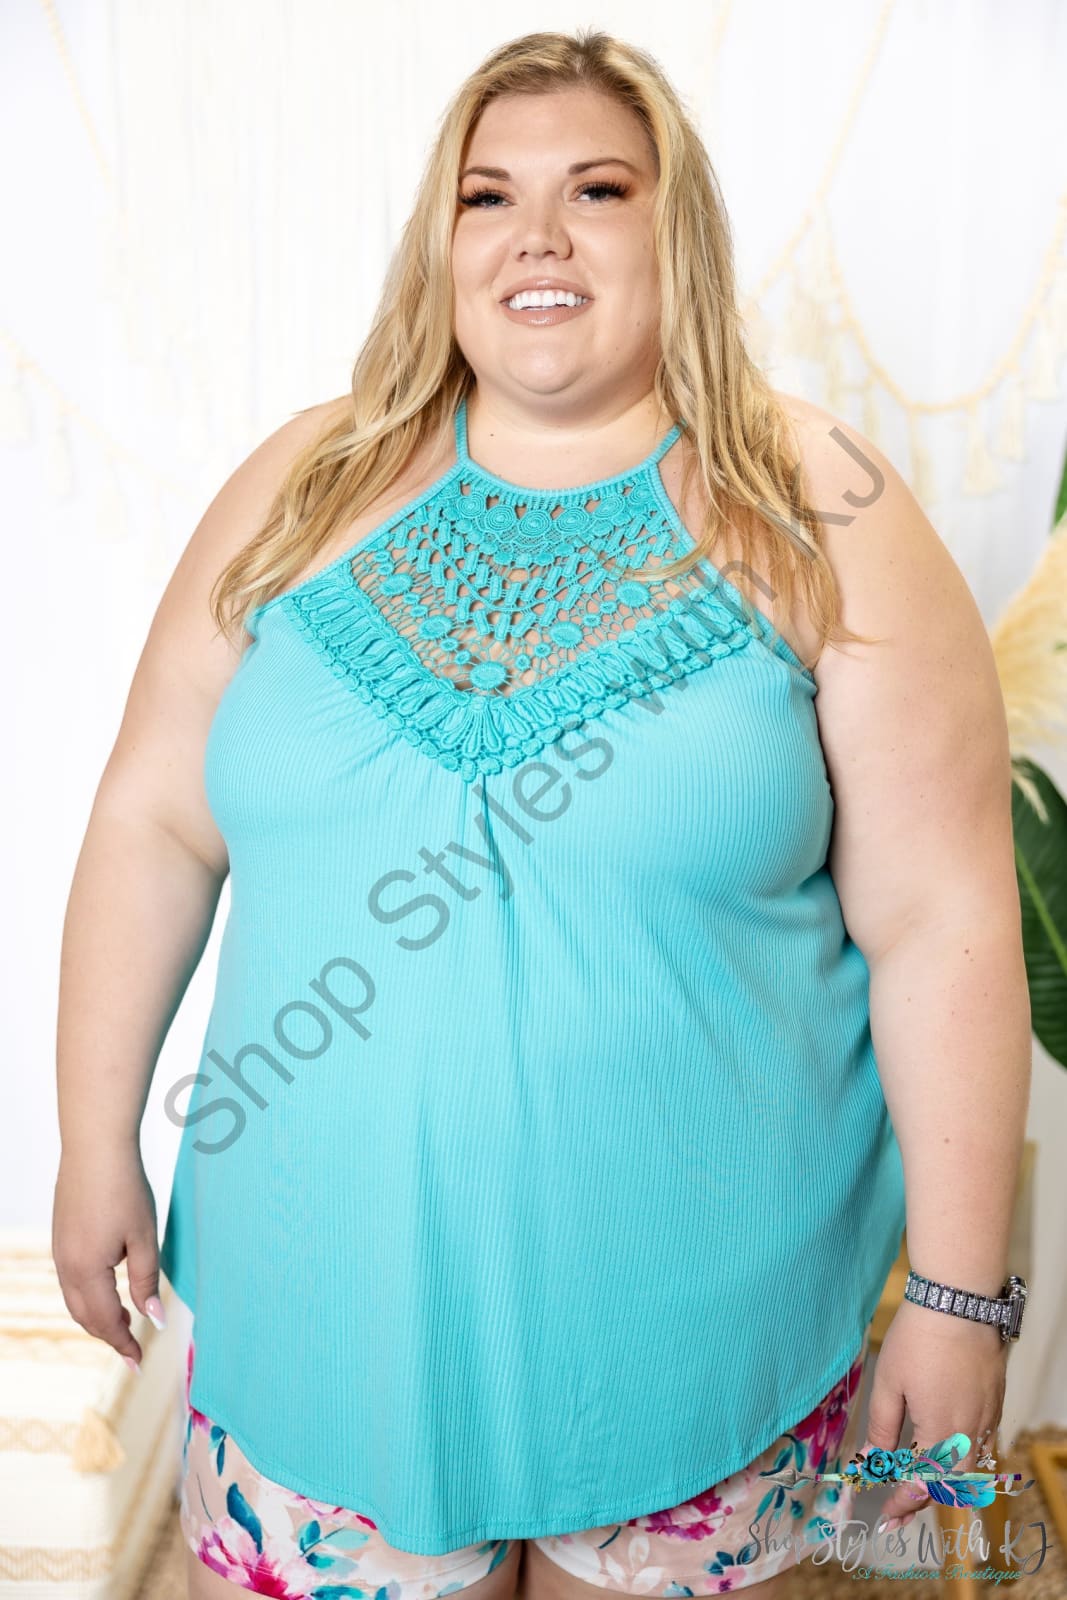 Wildest Dreams - Turquoise Sleeveless Top